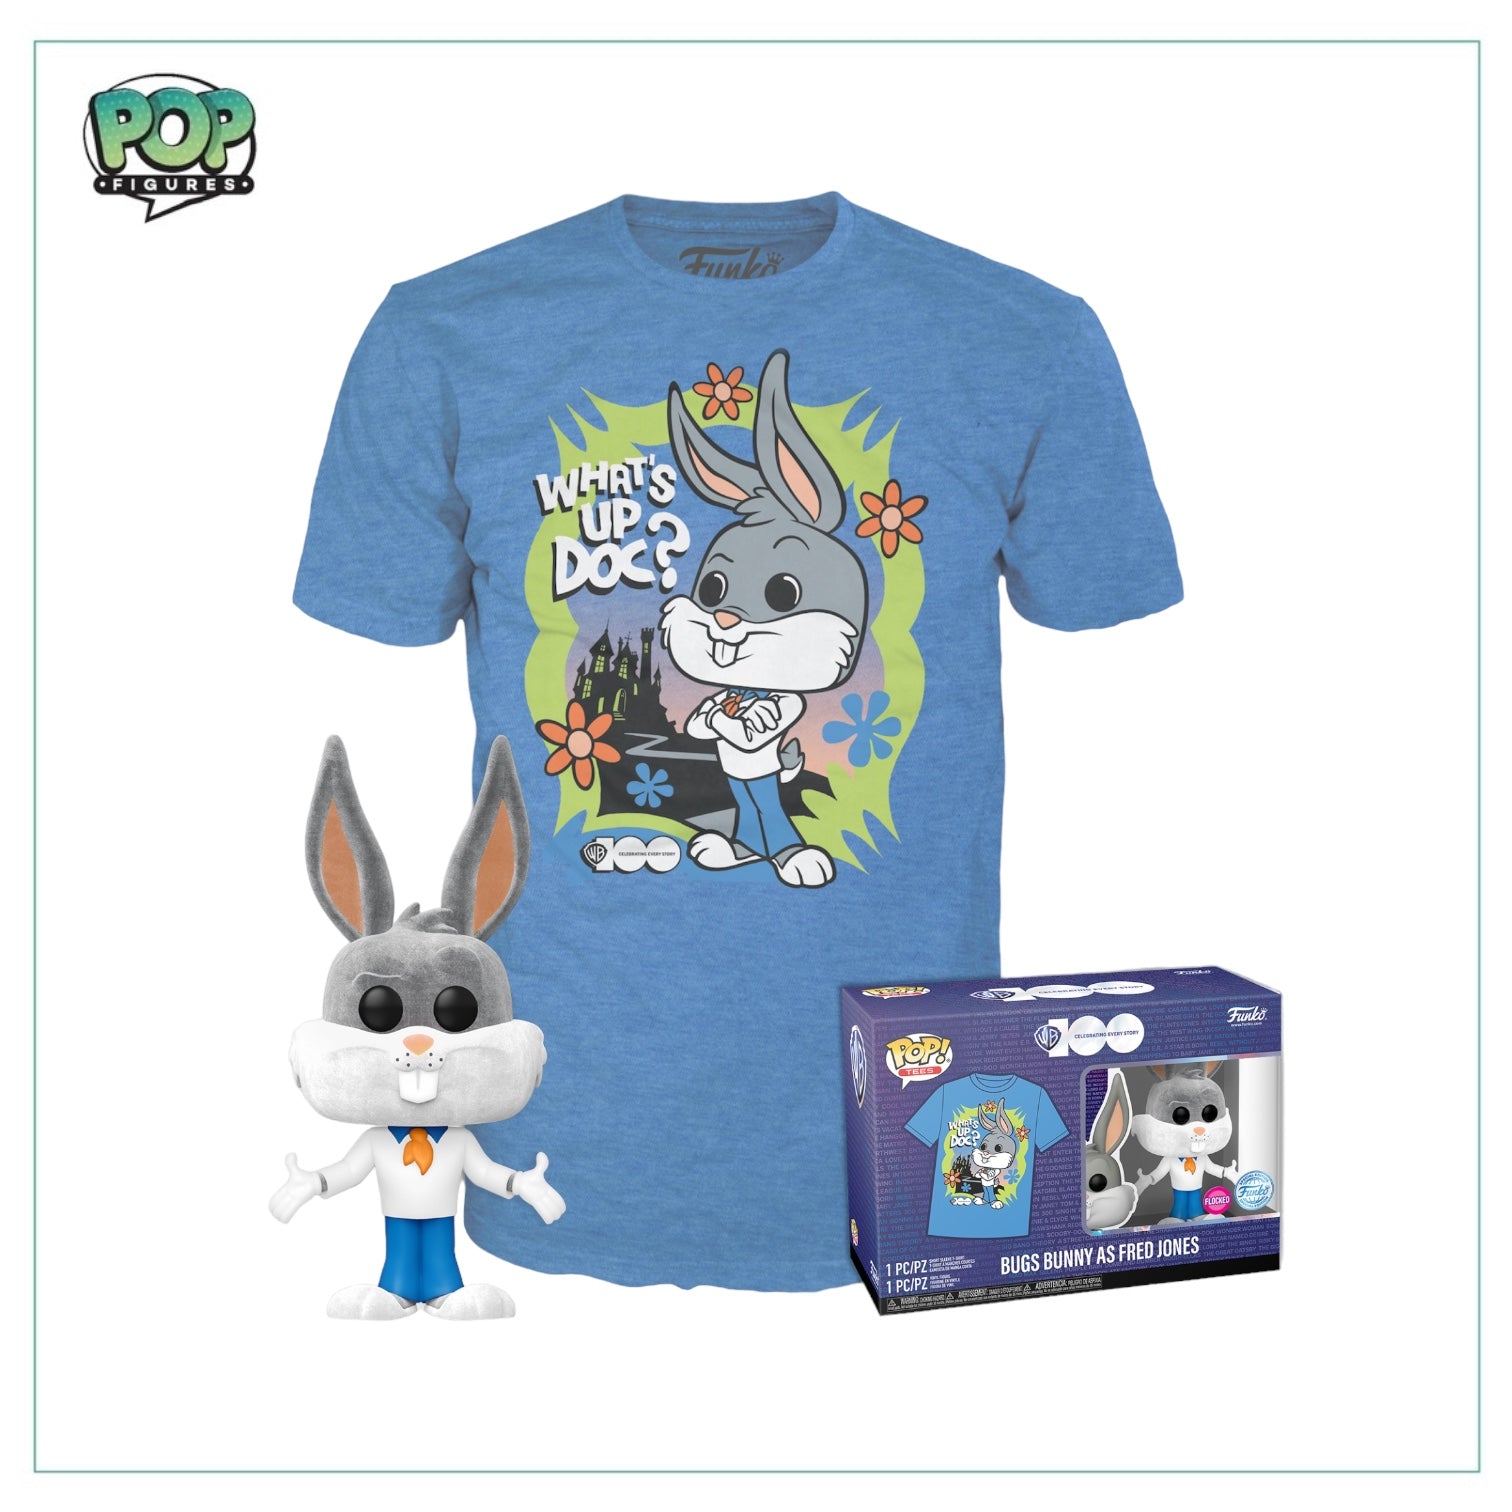 Pop and Tee - Bugs Bunny as Fred Jones -  Flocked